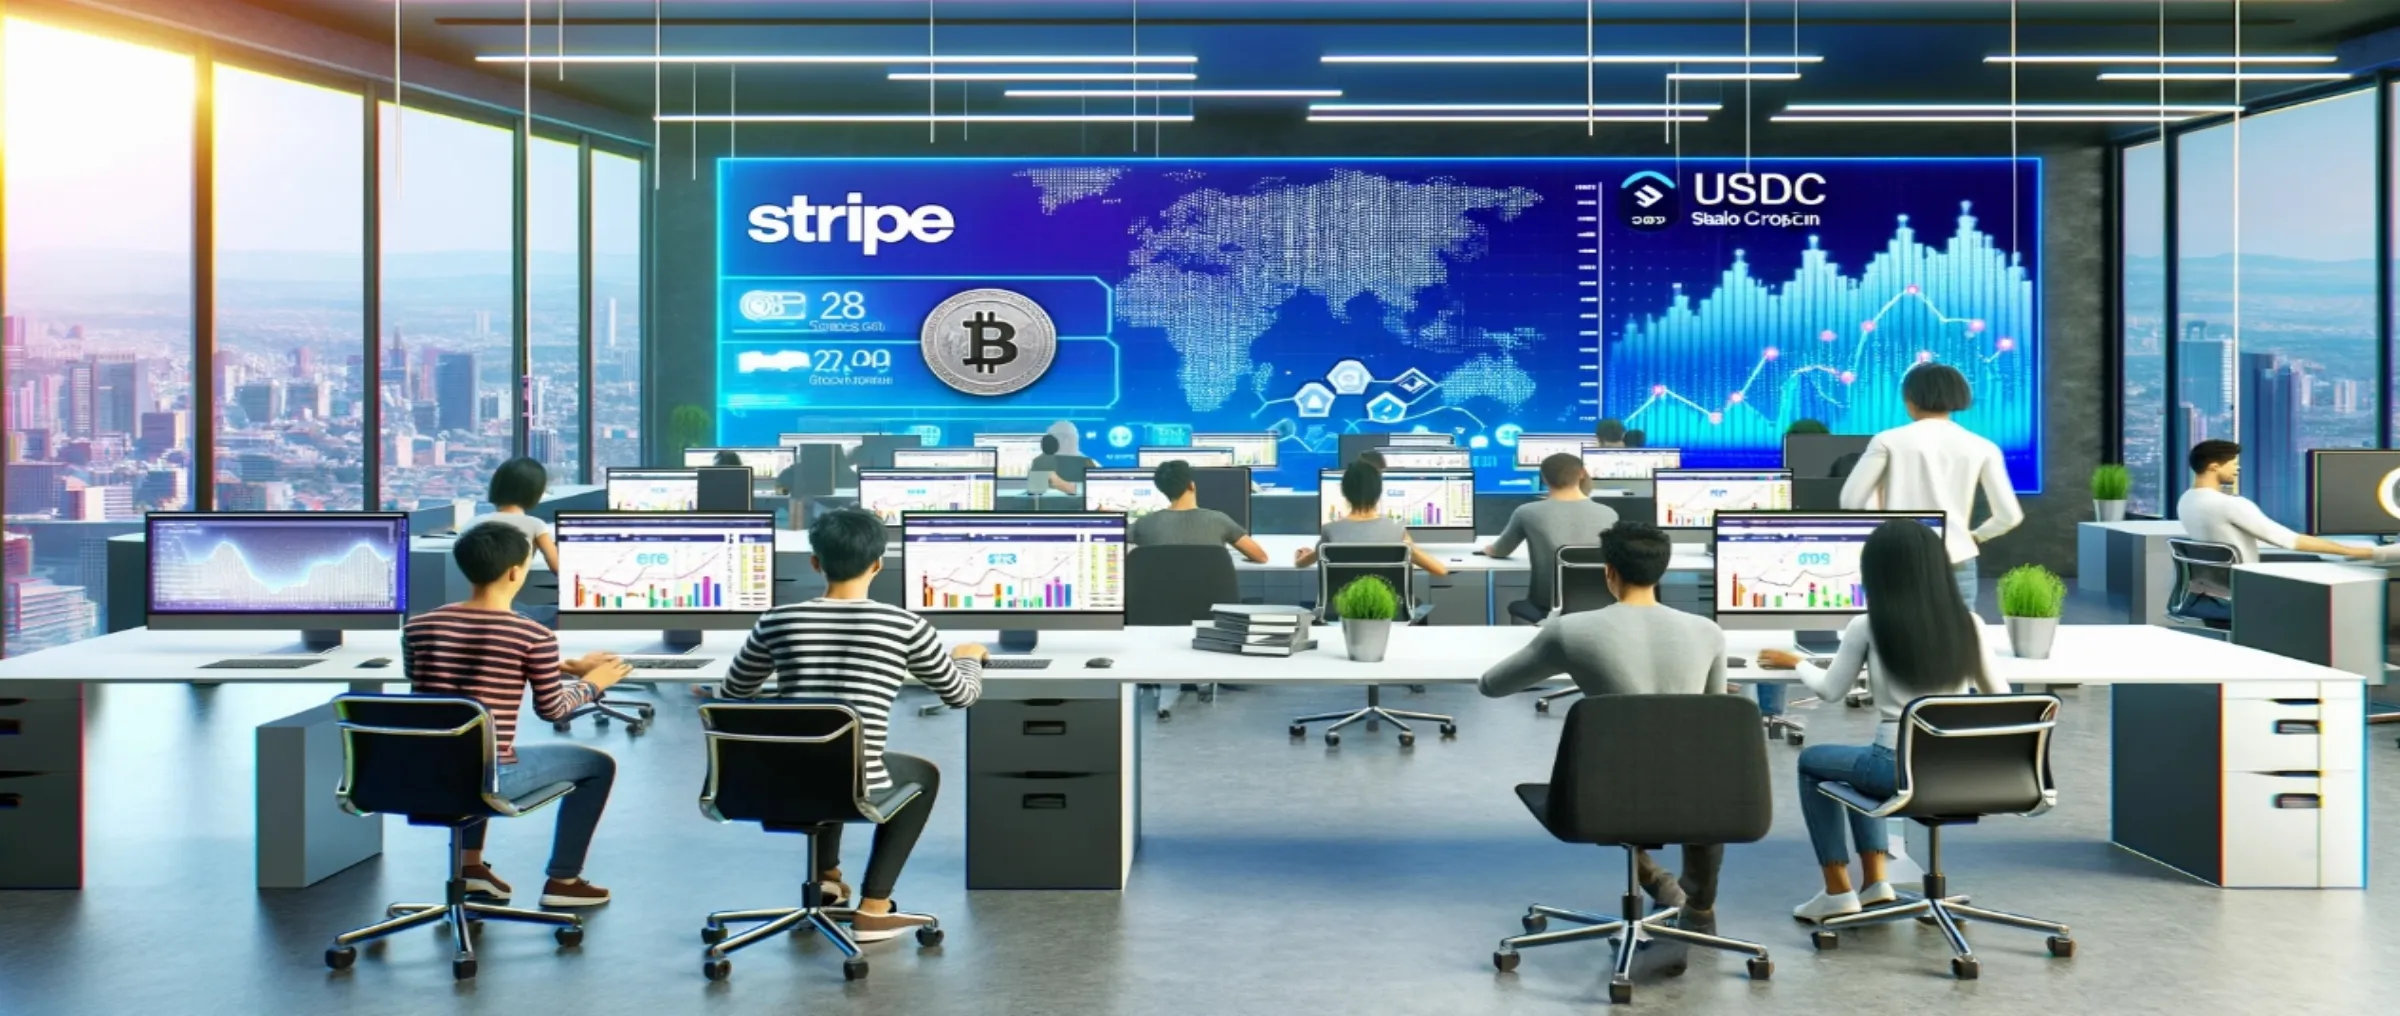 Stripe Resumes Crypto Payments Using the USDC Stablecoin